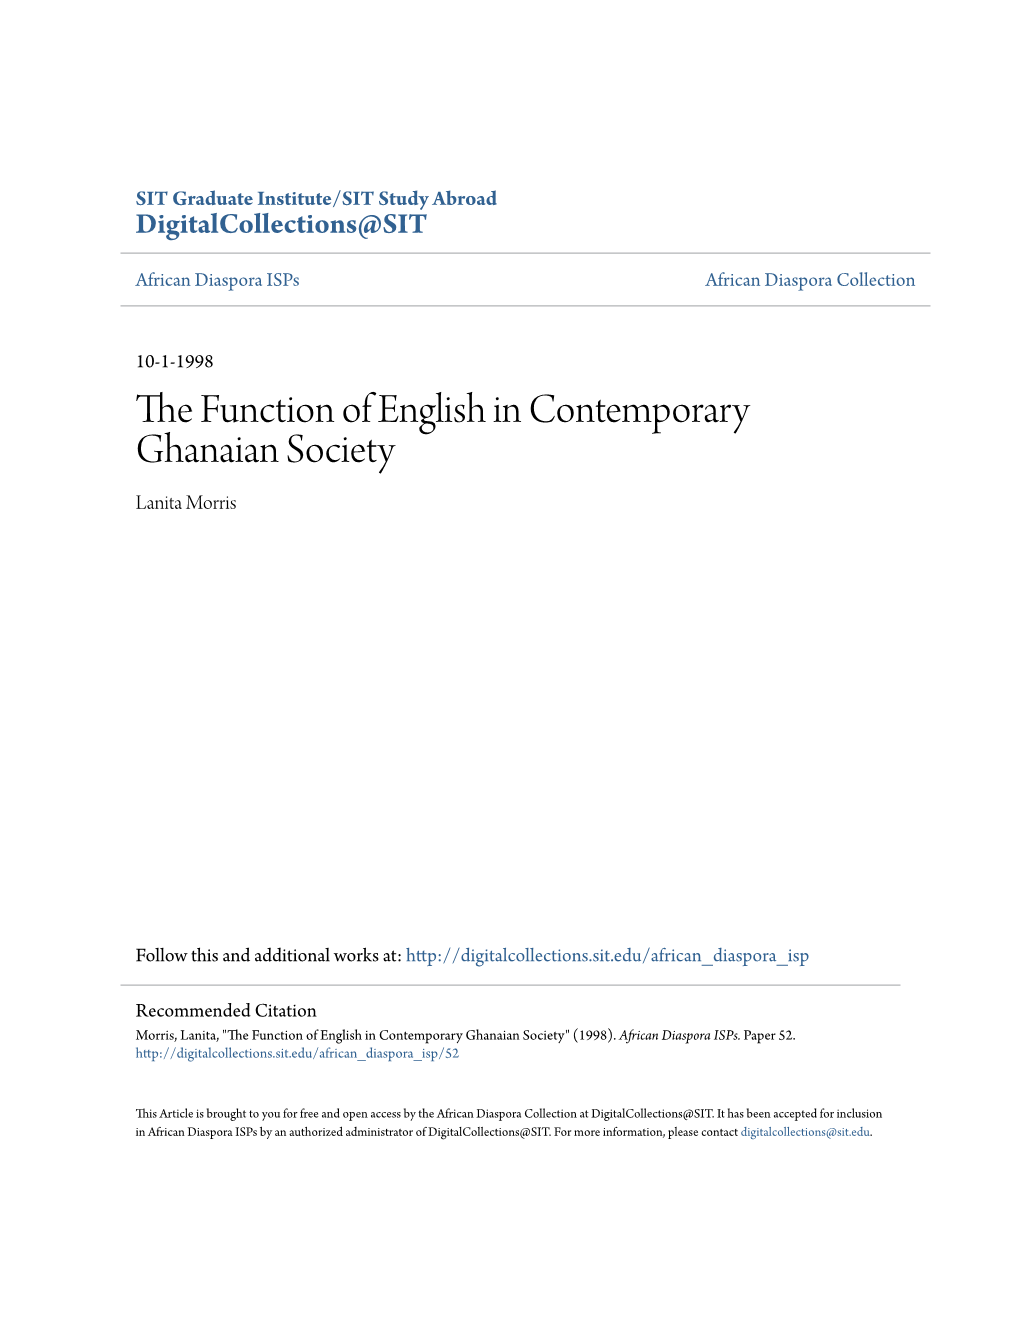 The Function of English in Contemporary Ghanaian Society